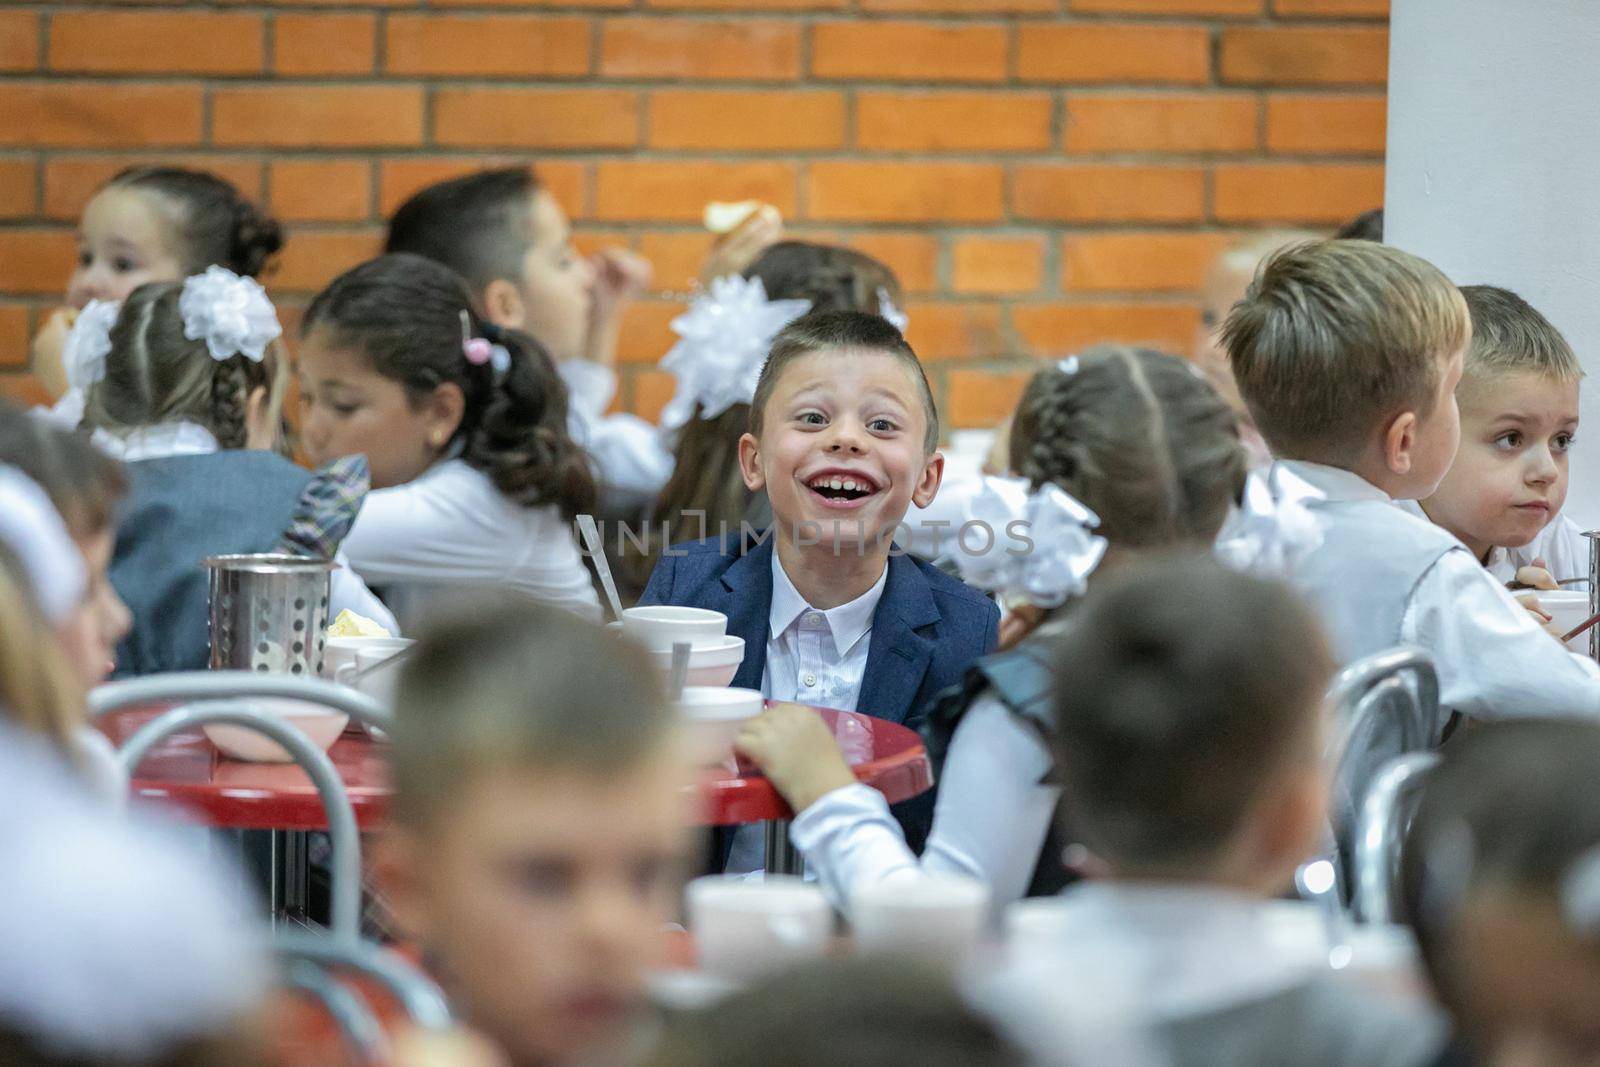 First graders eat in the school cafeteria. Moscow, Russia, September 2, 2019 by Yurich32